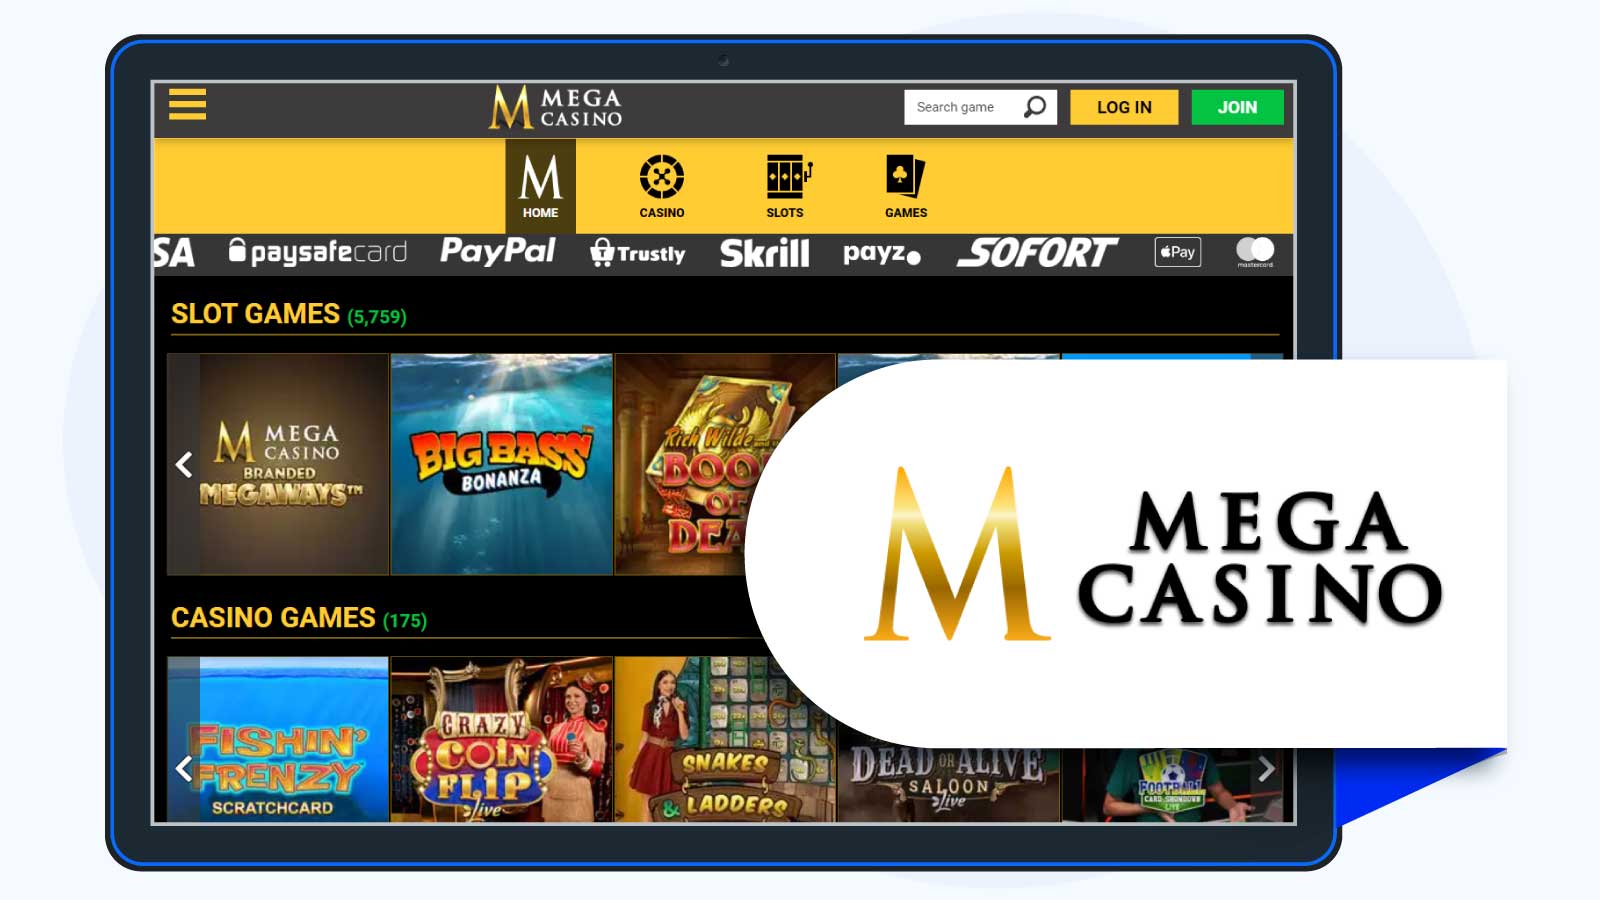 Mega Casino – Variety of Payment Methods